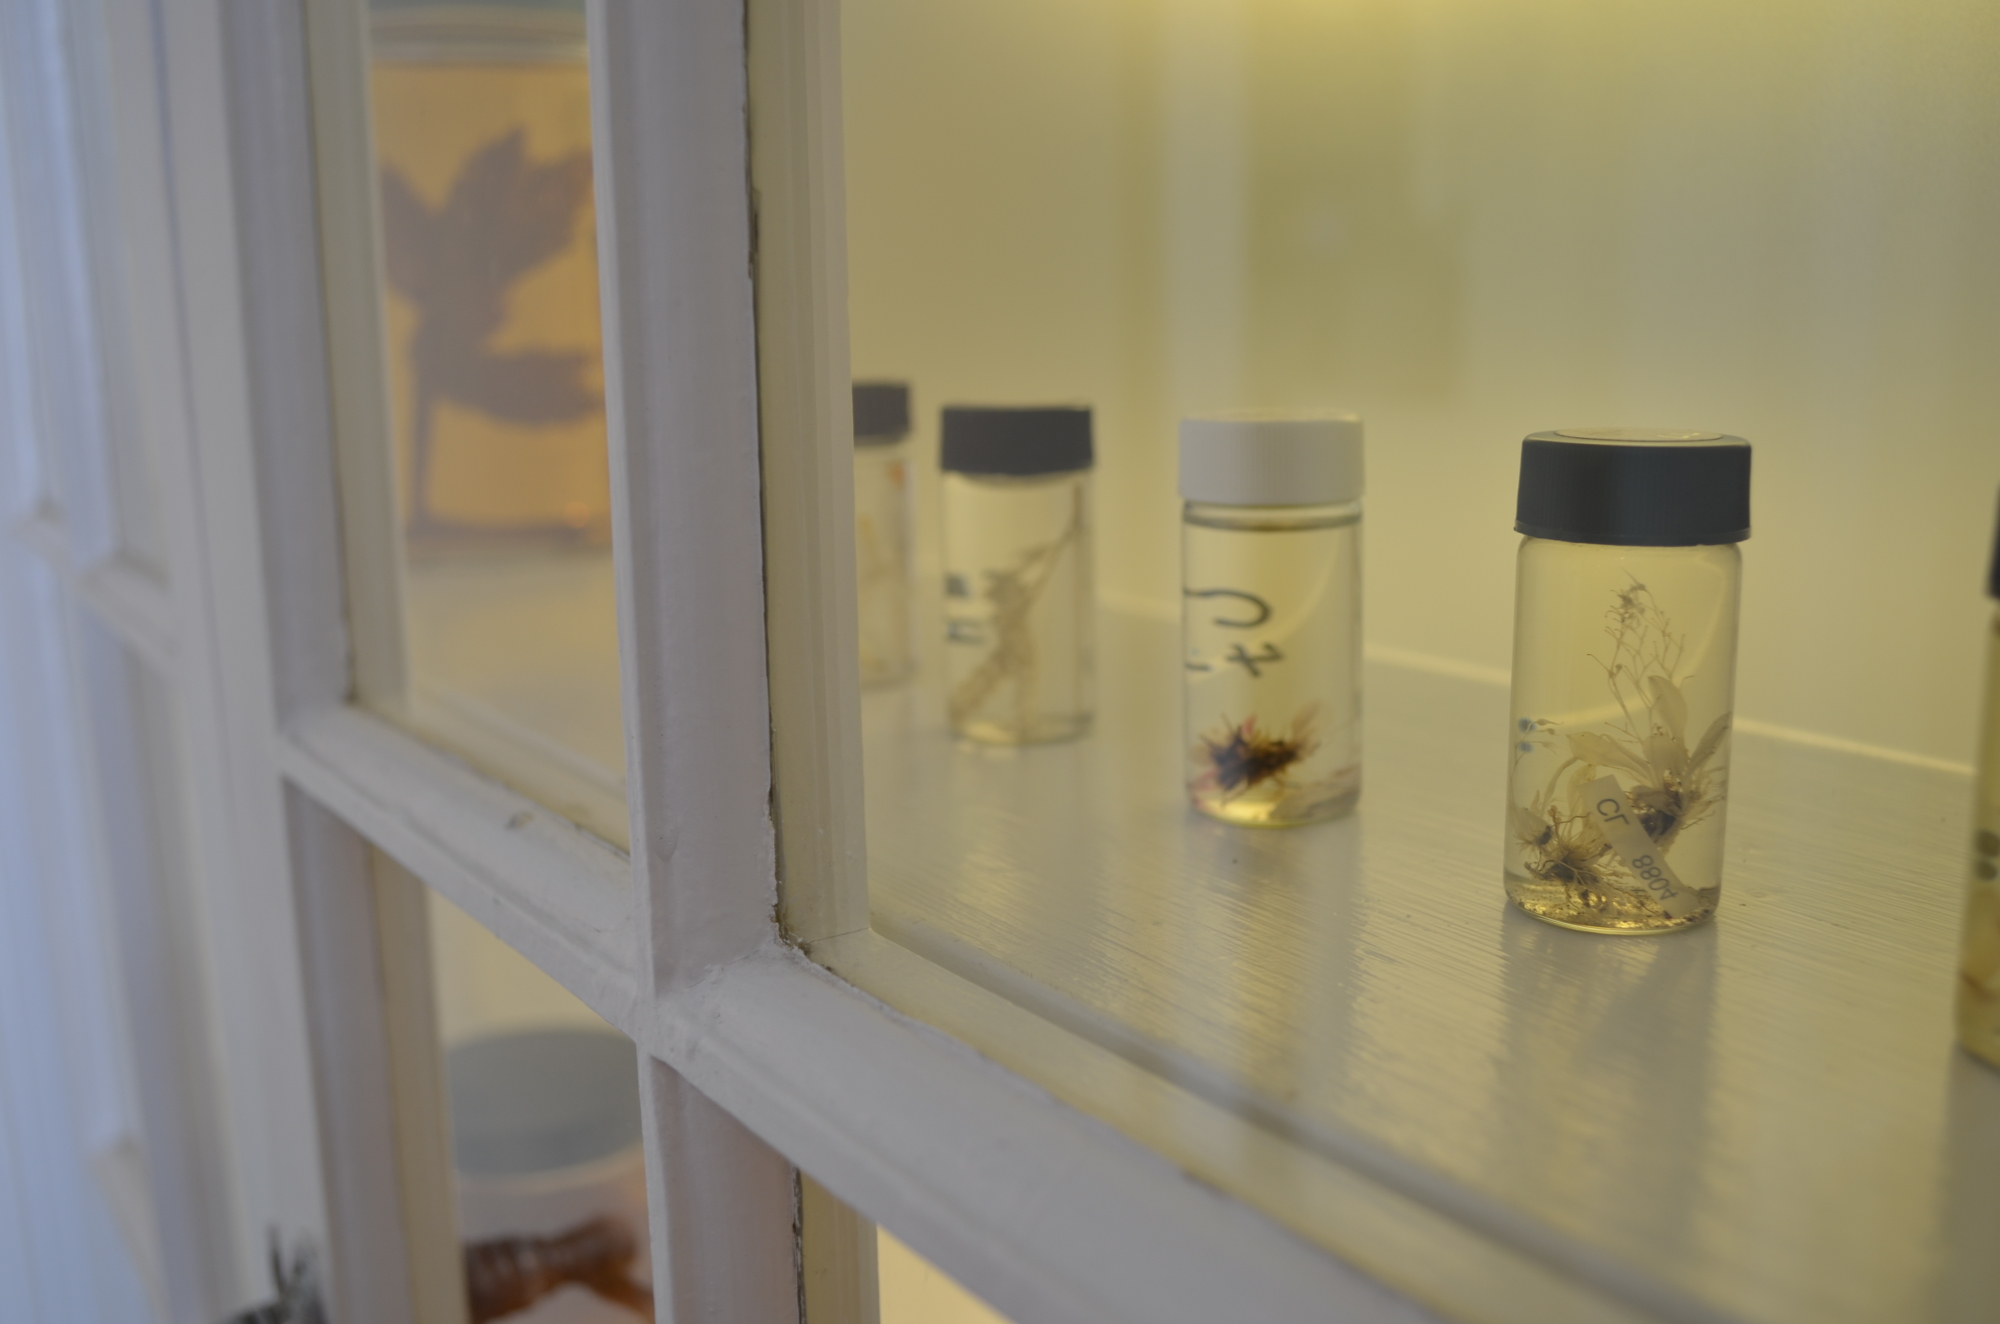 A shelf of voucher specimens in “spirit jars,” which help taxonomists identify old species and name new ones, catch the light next to the window of the exhibit. Photo by Niki Kottmann.